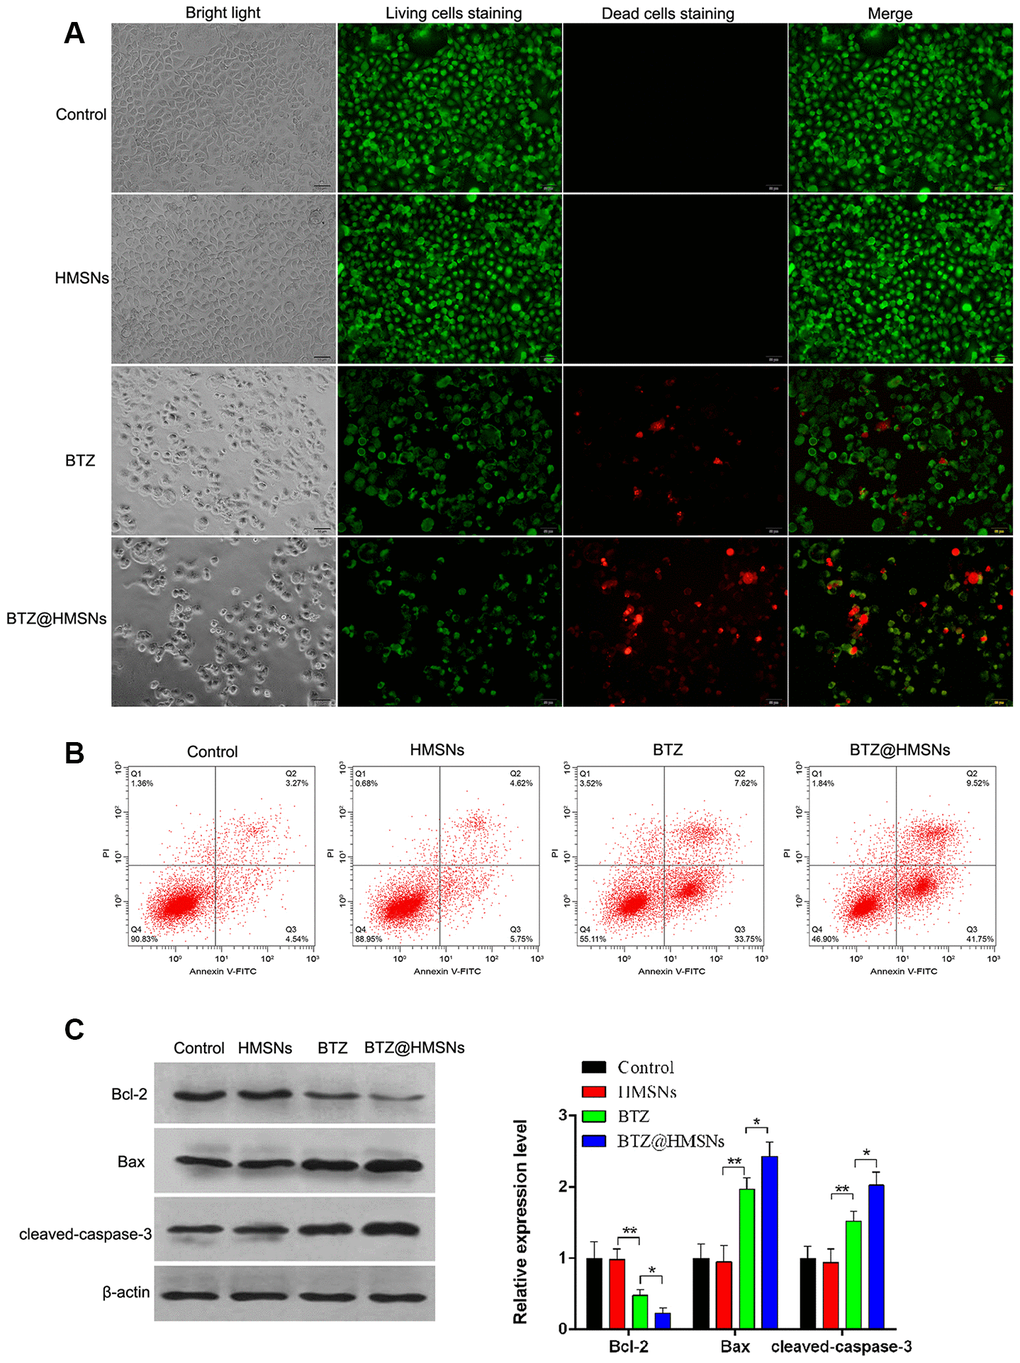 BTZ@HMSNs augments cell death of lymphoma. (A) Live/dead staining detection for SNK-1 cells treated with PBS (control), HMSNs, BTZ (75 nM), BTZ@HMSNs (containing 75 nM of BTZ). Scale bar equals 5 nm. (B) Cell apoptosis rate of SNK-1 cells treated with PBS (control), HMSNs, BTZ, BTZ@HMSNs by flow cytometry analysis. (C) The expression of apoptosis-related proteins (Bcl-2, Bax, and cleaved-caspase-3) in SNK-1 cells treated with PBS (control), HMSNs, BTZ, BTZ@HMSNs by western blotting. BTZ, bortezomib; HMSNs, hollow mesoporous silica nanospheres. The differences between groups were analyzed by one-way ANOVA followed by multiple comparison with Tukey test. *P P 